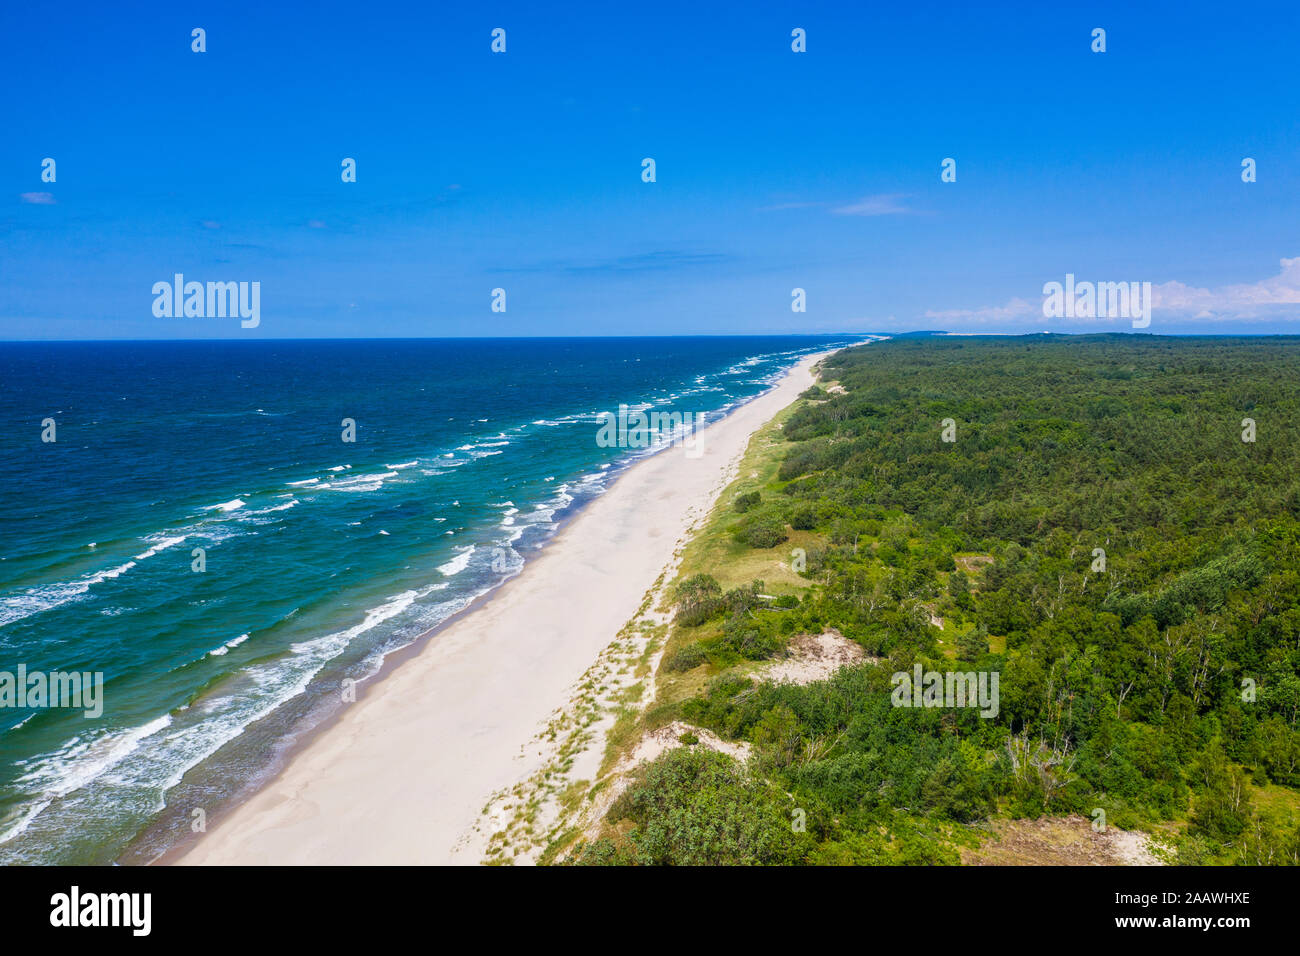 Aerial view of sea against blue sky during sunny day in Curonian Spit, Russia Stock Photo